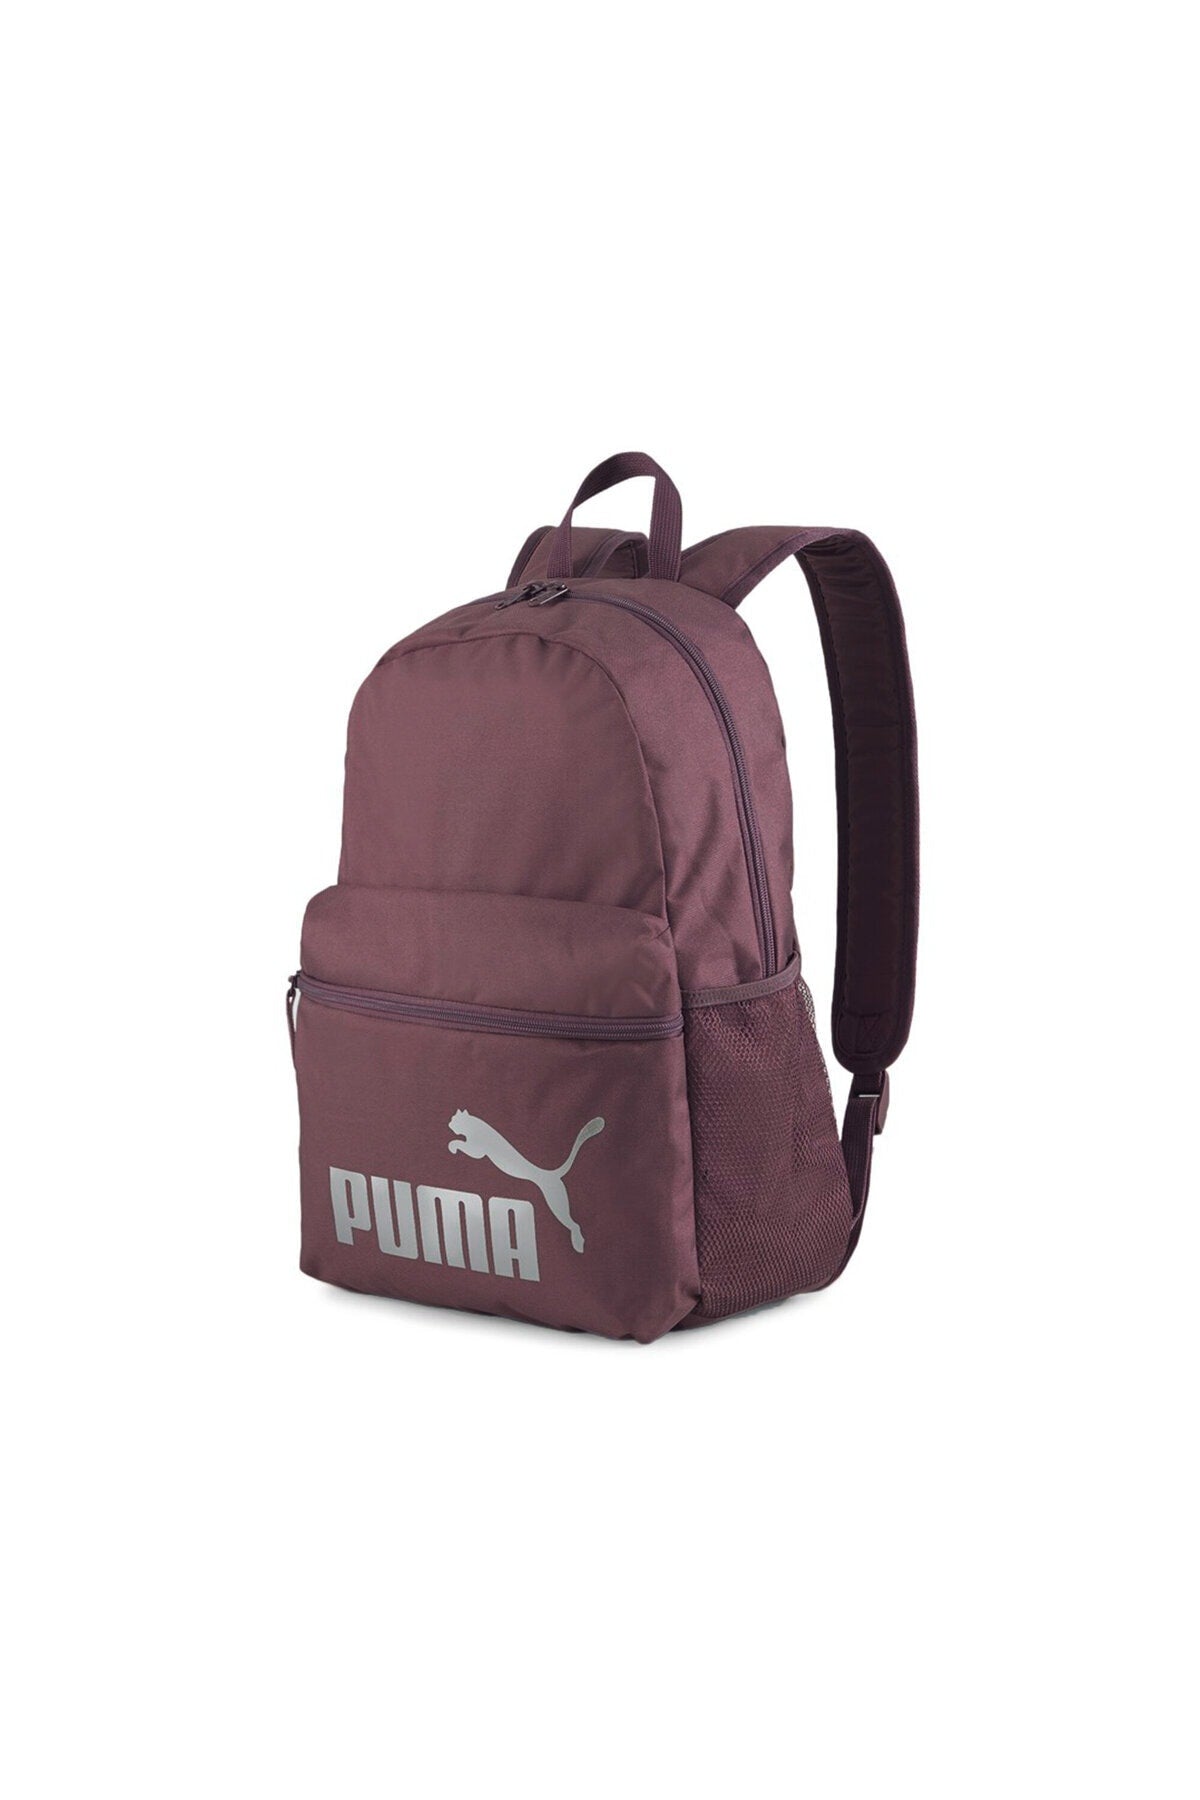 Phase Backpack 7548741 7548741 Pink